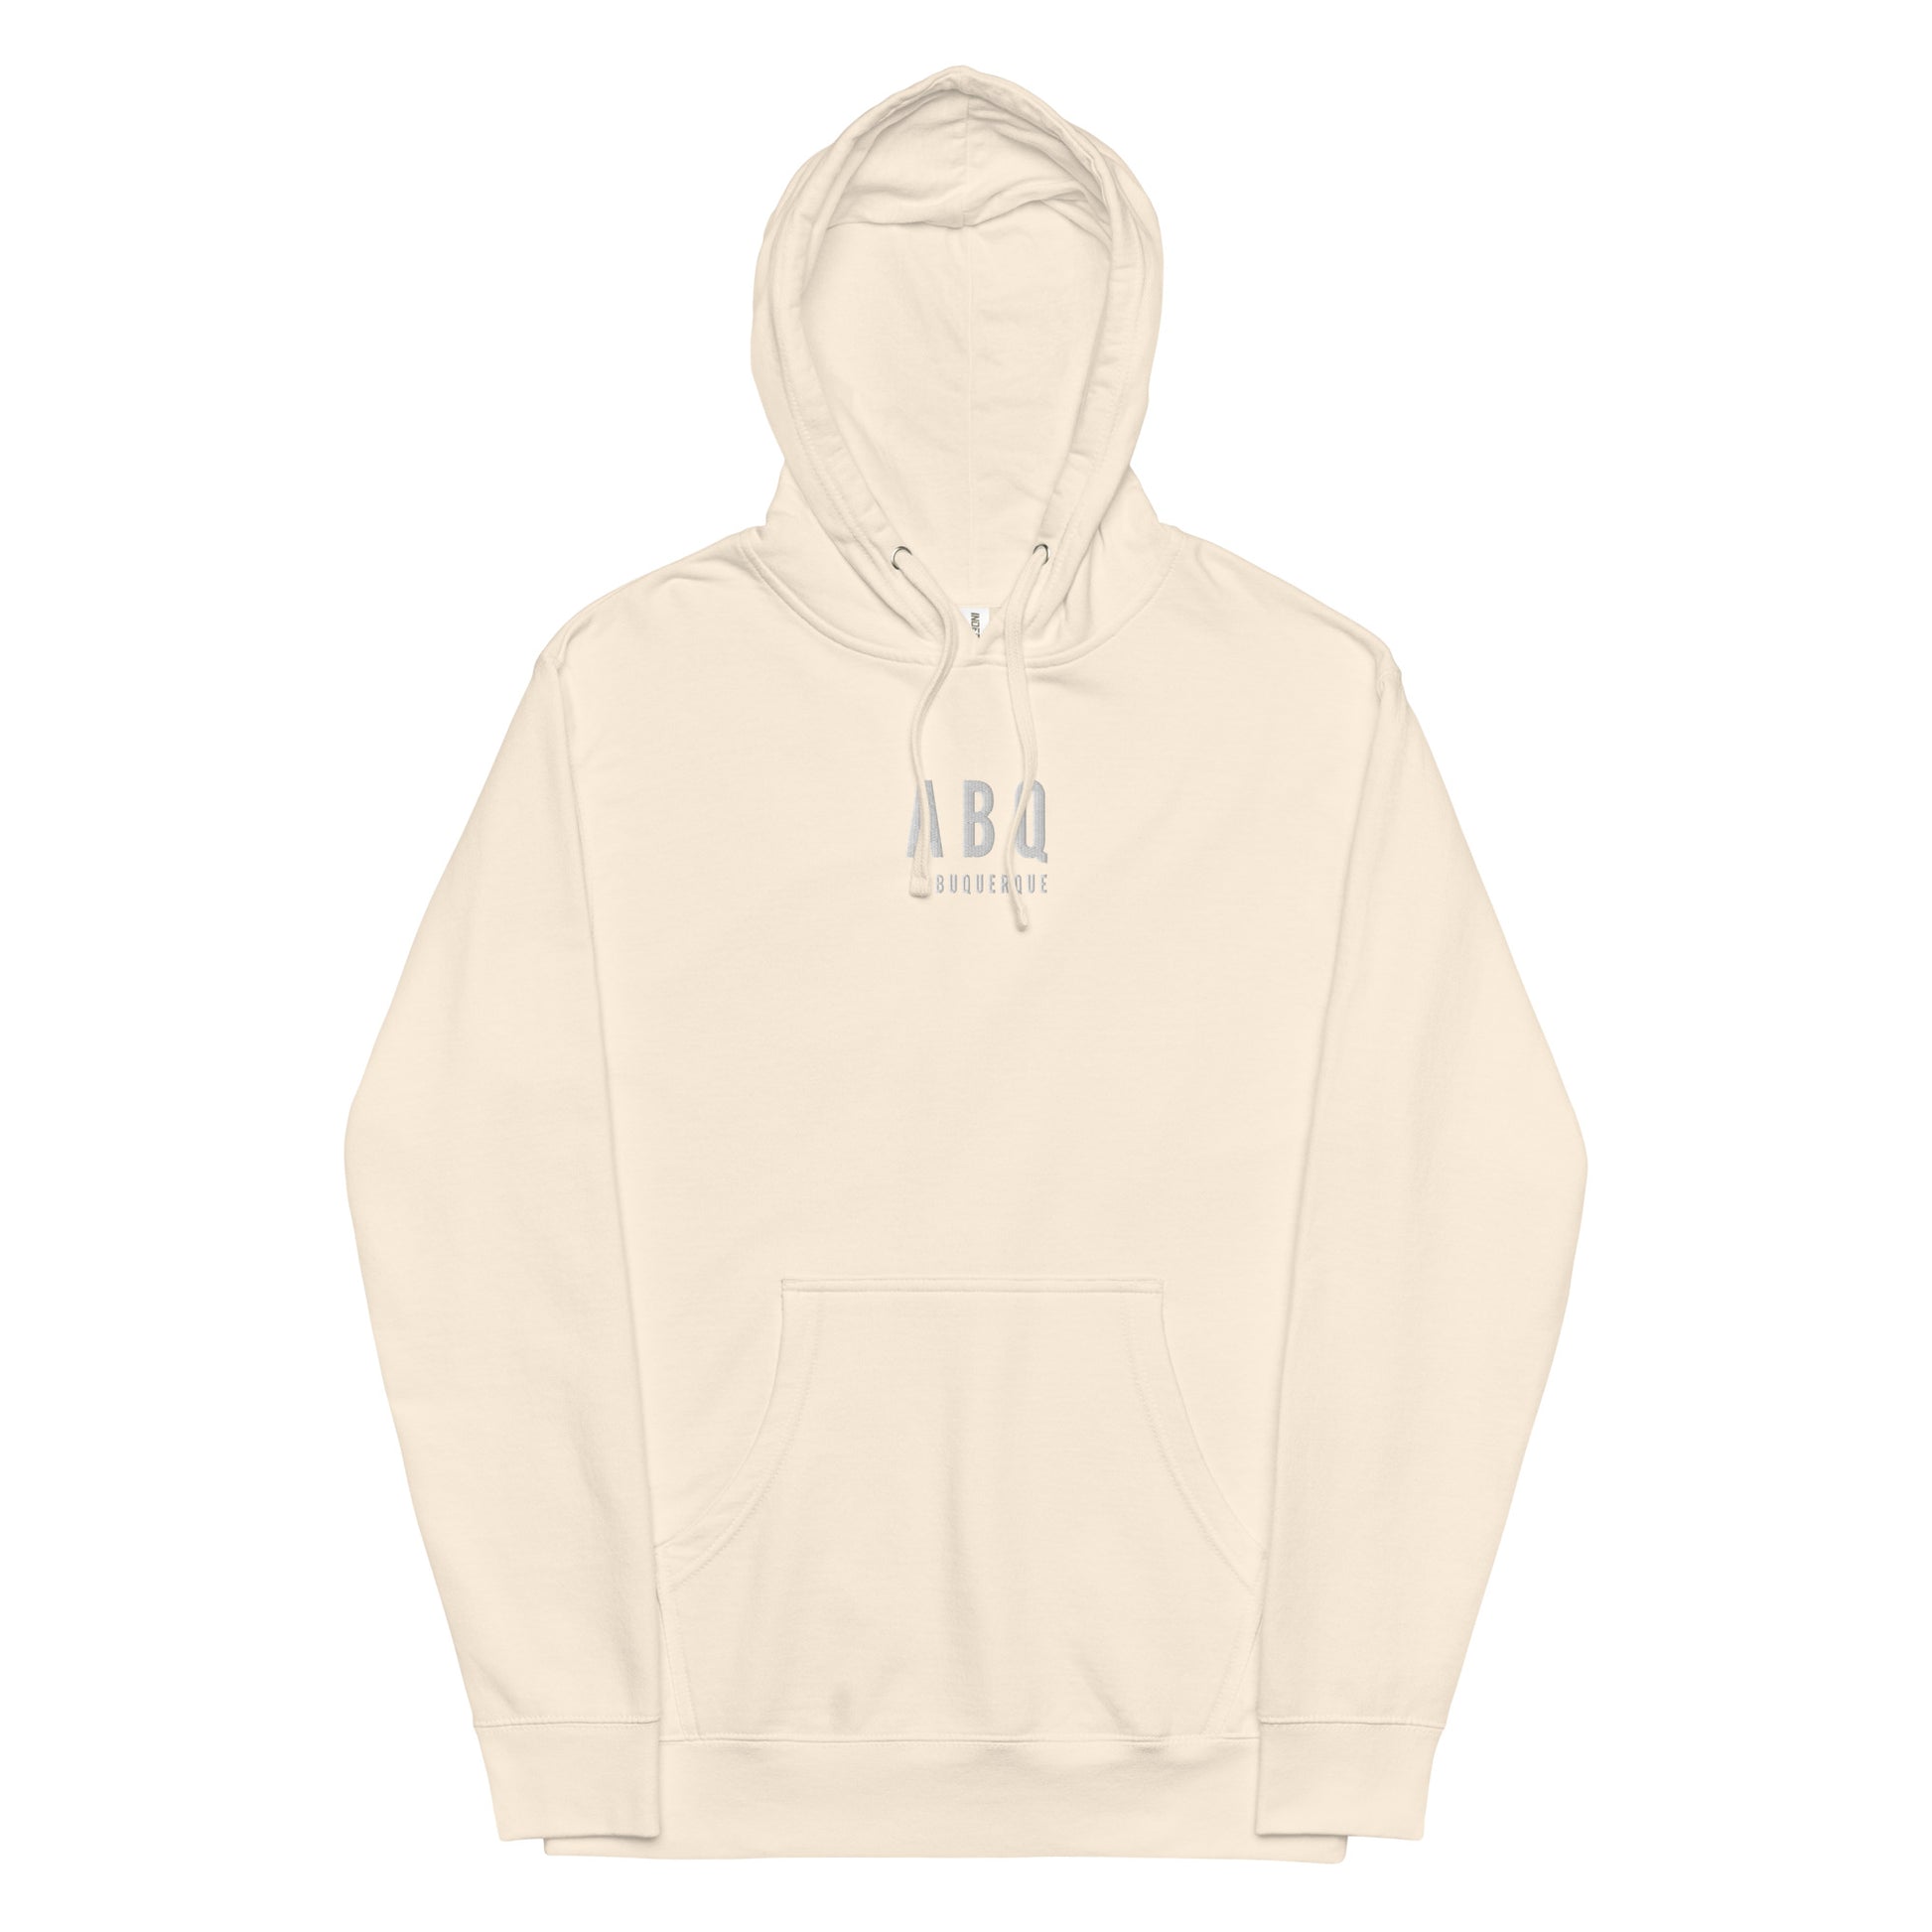 City Midweight Hoodie - White • ABQ Albuquerque • YHM Designs - Image 17